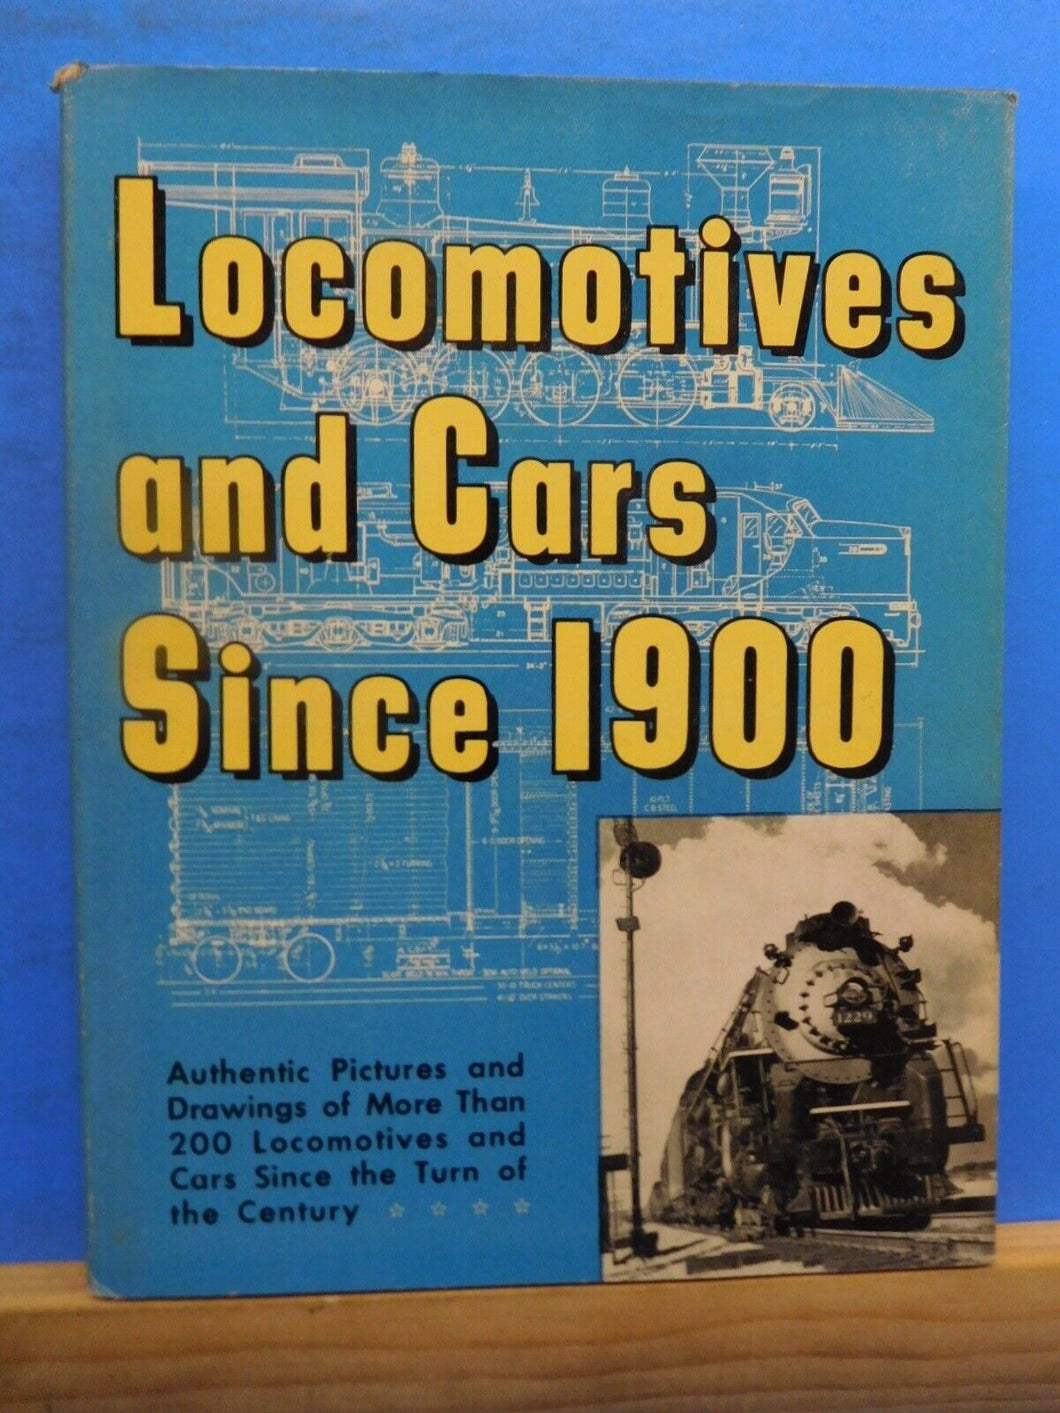 Locomotives and Cars Since 1900 by Walter Lucas  Dust jacket  200 locos & cars